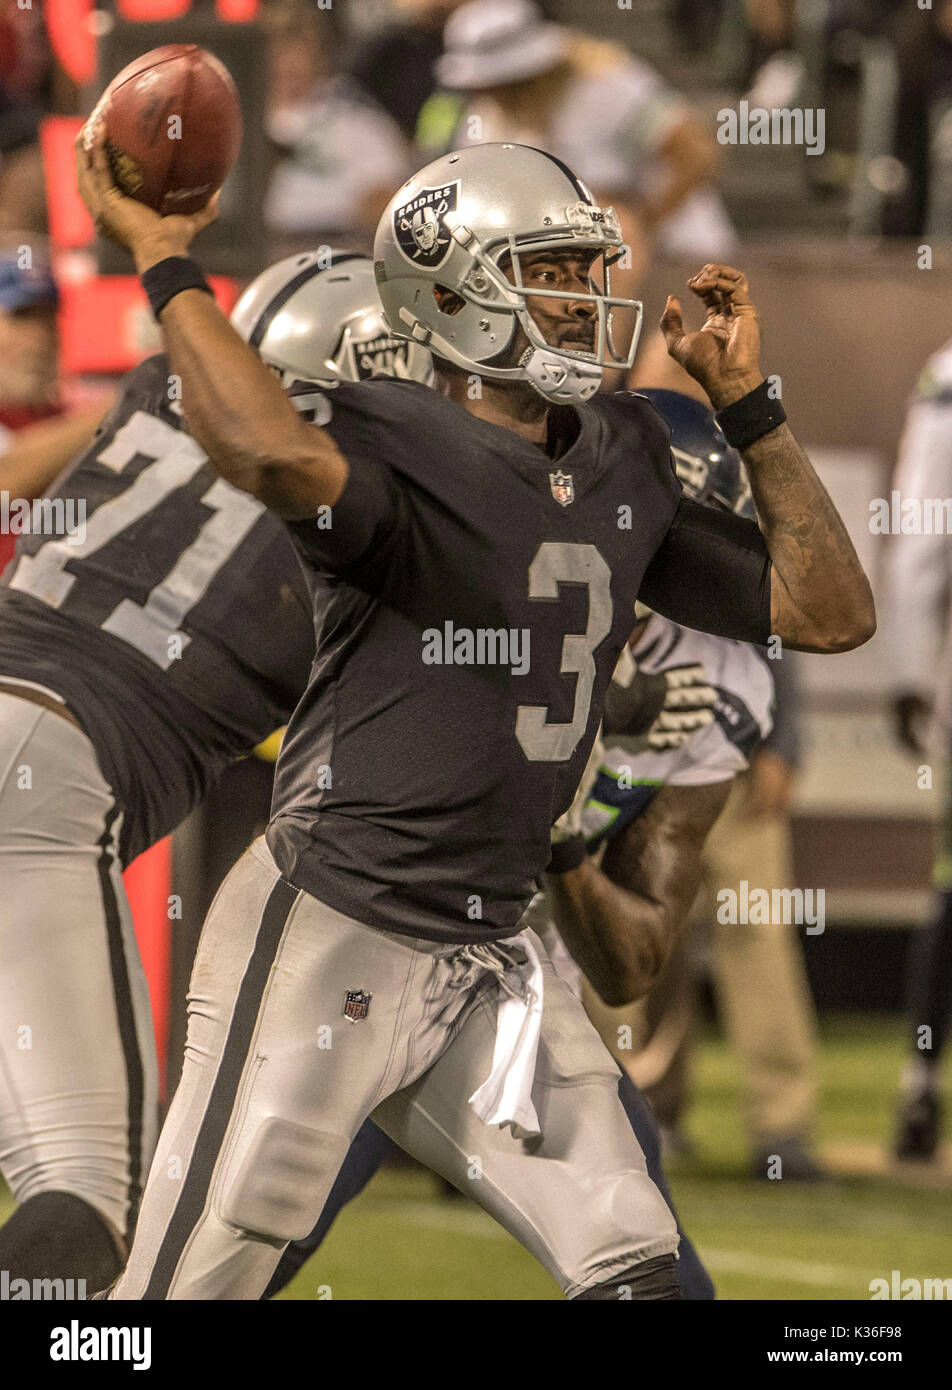 August 31, 2017: Oakland Raiders quarterback EJ Manuel (3) fires pass down field on Thursday, August 31, 2017, at Oakland-Alameda County Coliseum in Oakland, California. The Seahawks defeated the Raiders in a preseason game 17-13. Al Golub/CSM Stock Photo